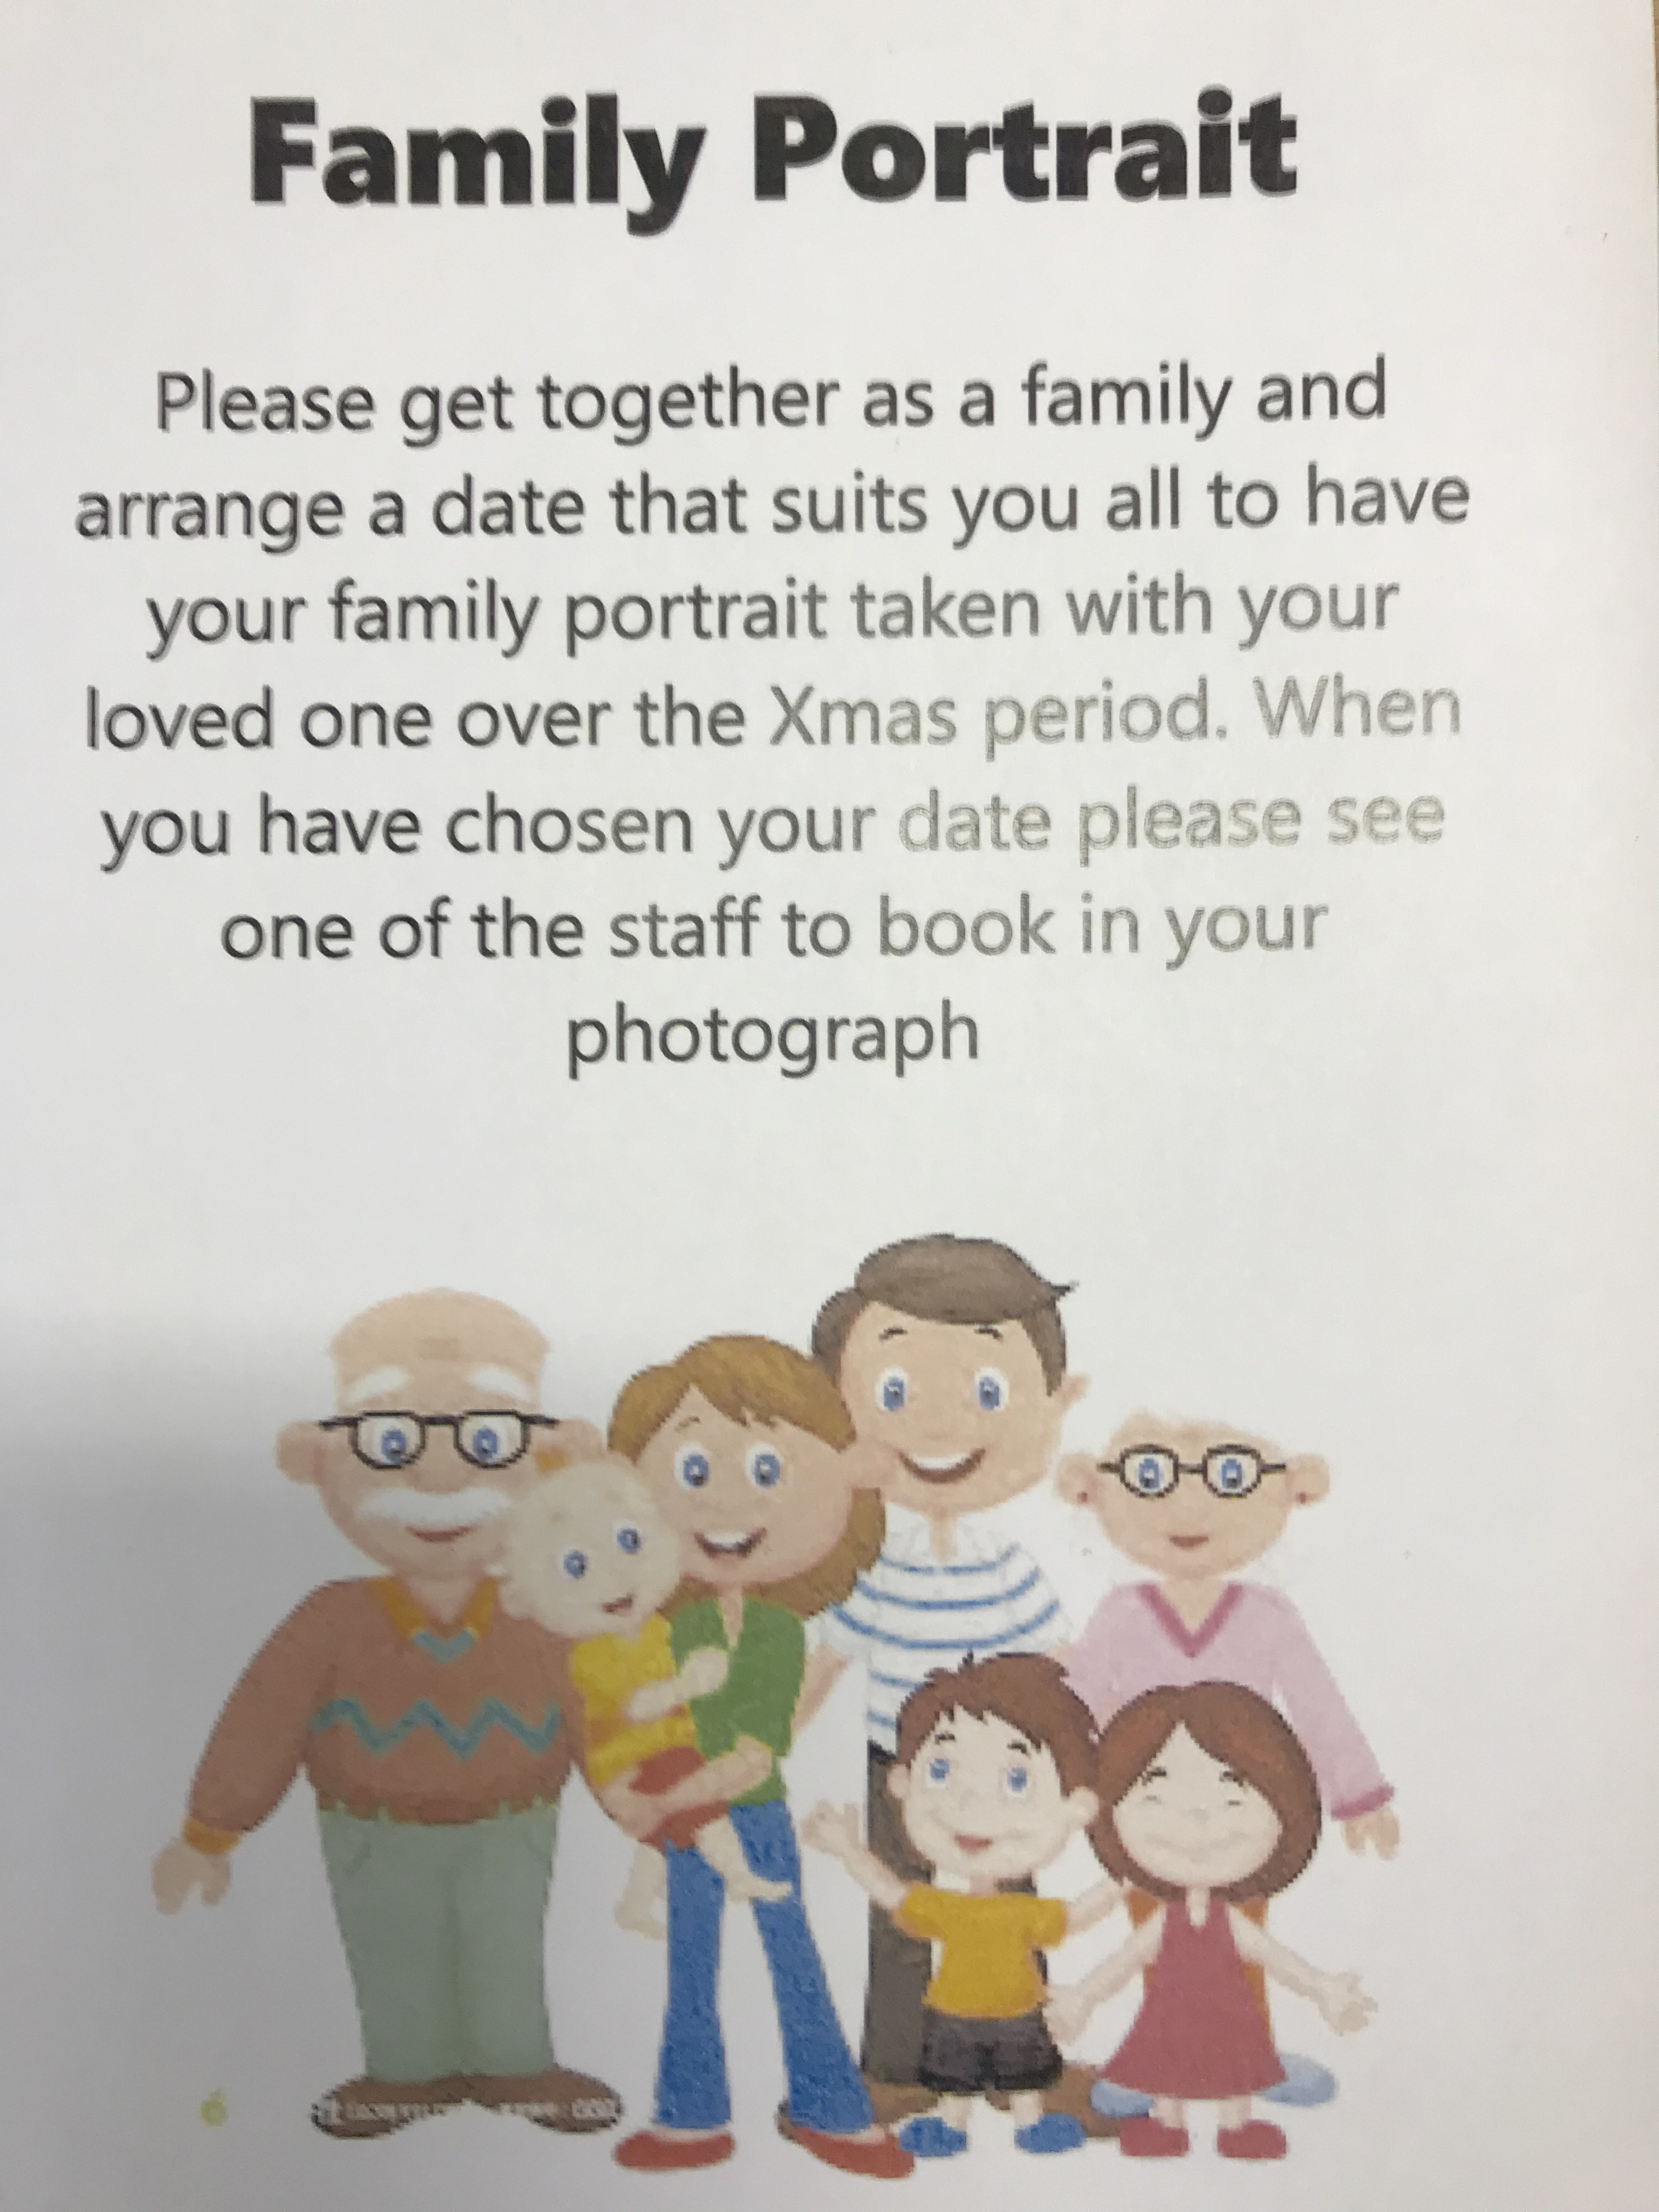 Family Portraits at Elizabeth Court Care Centre: Key Healthcare is dedicated to caring for elderly residents in safe. We have multiple dementia care homes including our care home middlesbrough, our care home St. Helen and care home saltburn. We excel in monitoring and improving care levels.